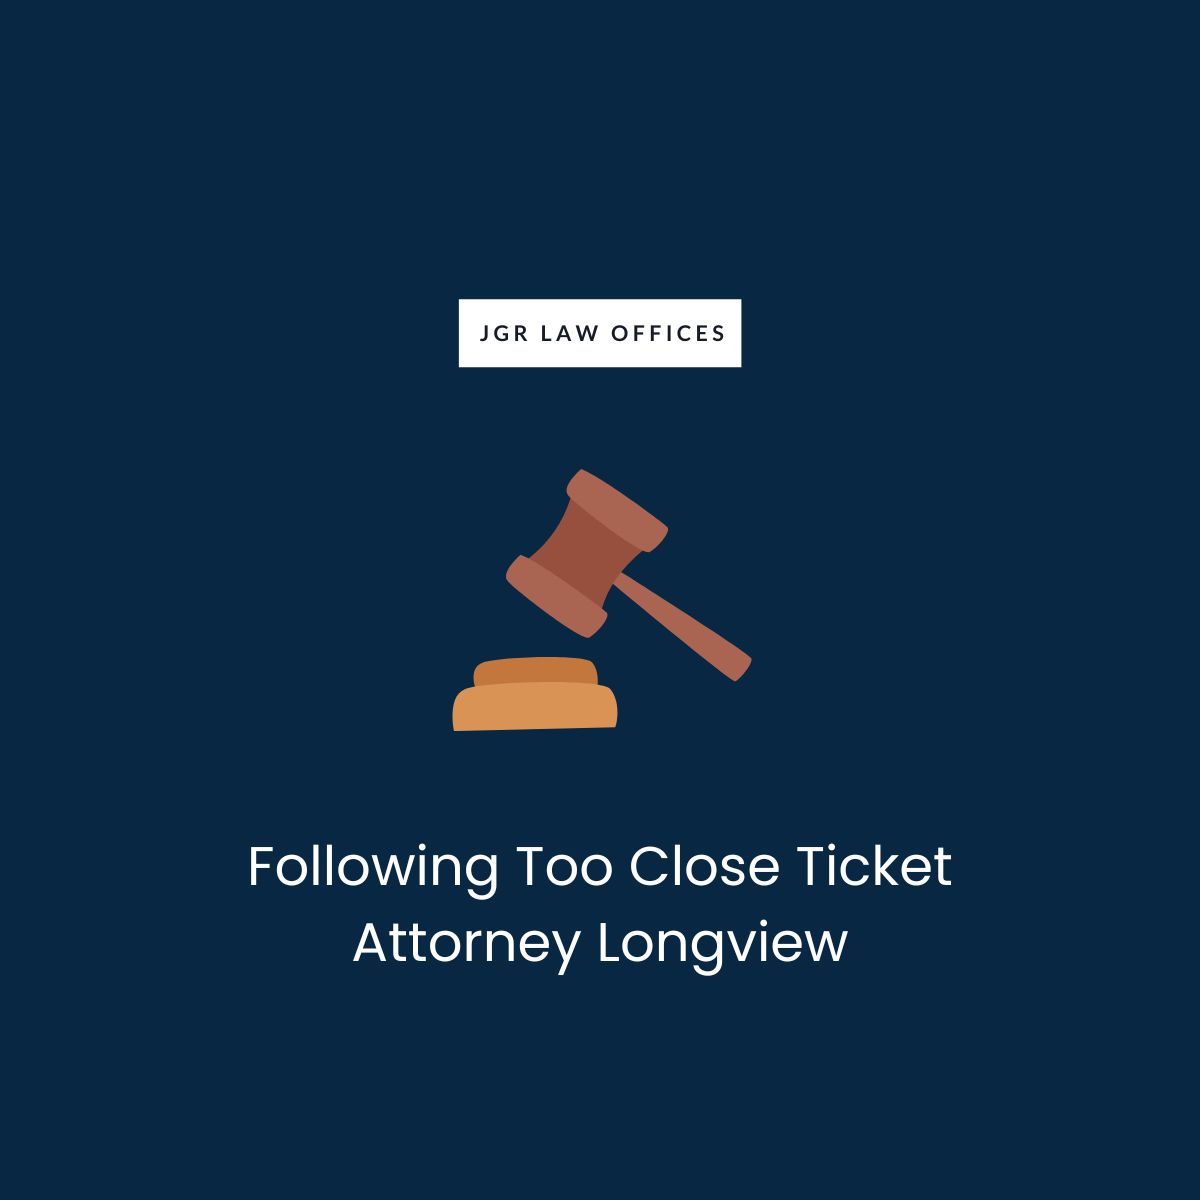 Following Too Close Ticket Attorney Longview